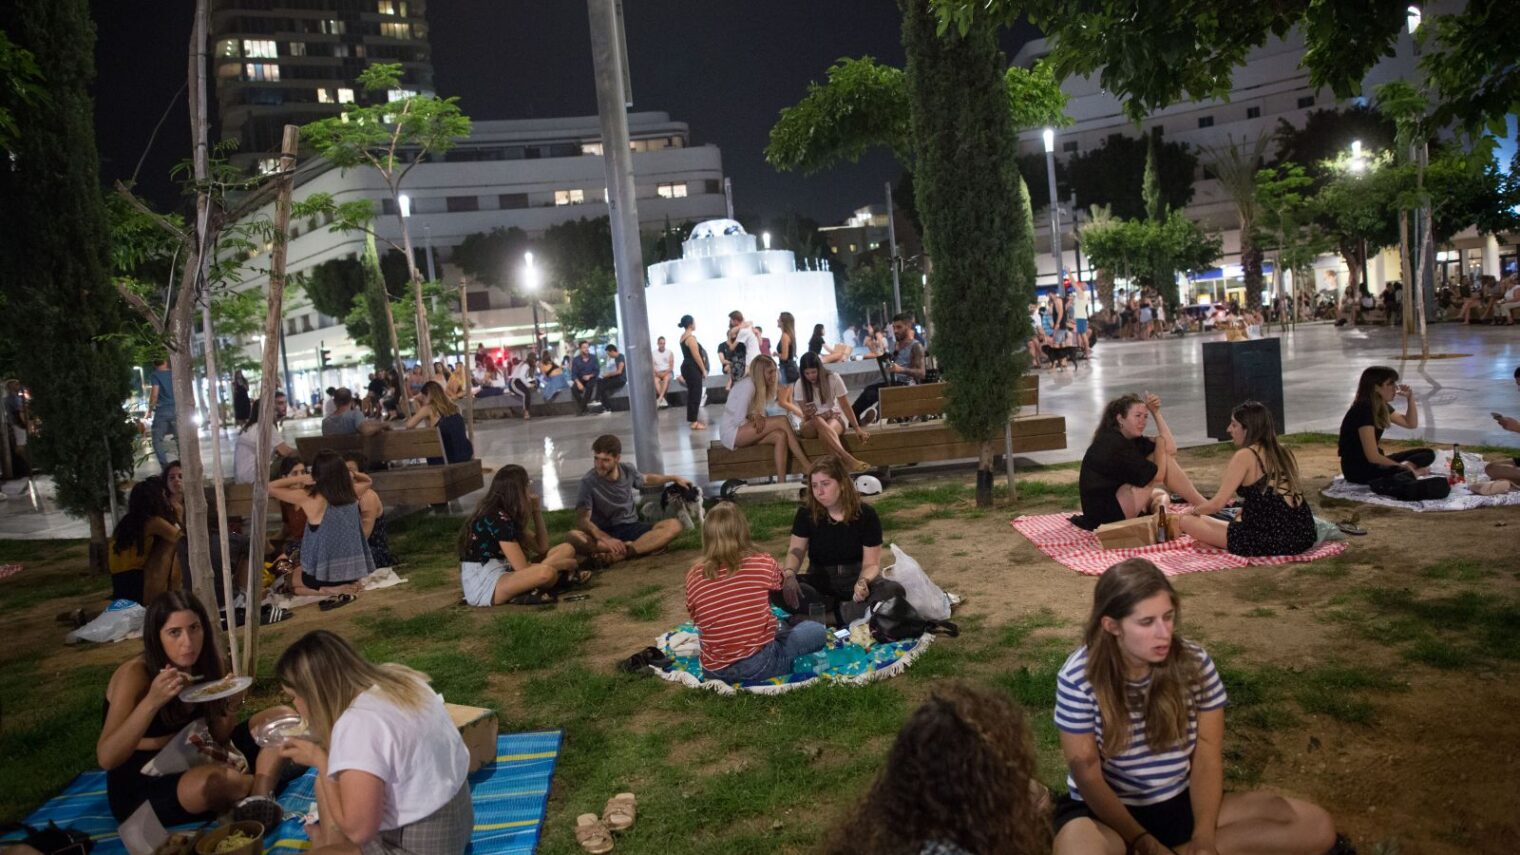 With bars and restaurants still closed, Israelis picnic in Dizengoff Square in Tel Aviv on May 20, 2020. An extreme heatwave meant facemasks were not obligatory. They are now mandatory again. Photo by Miriam Alster/Flash90